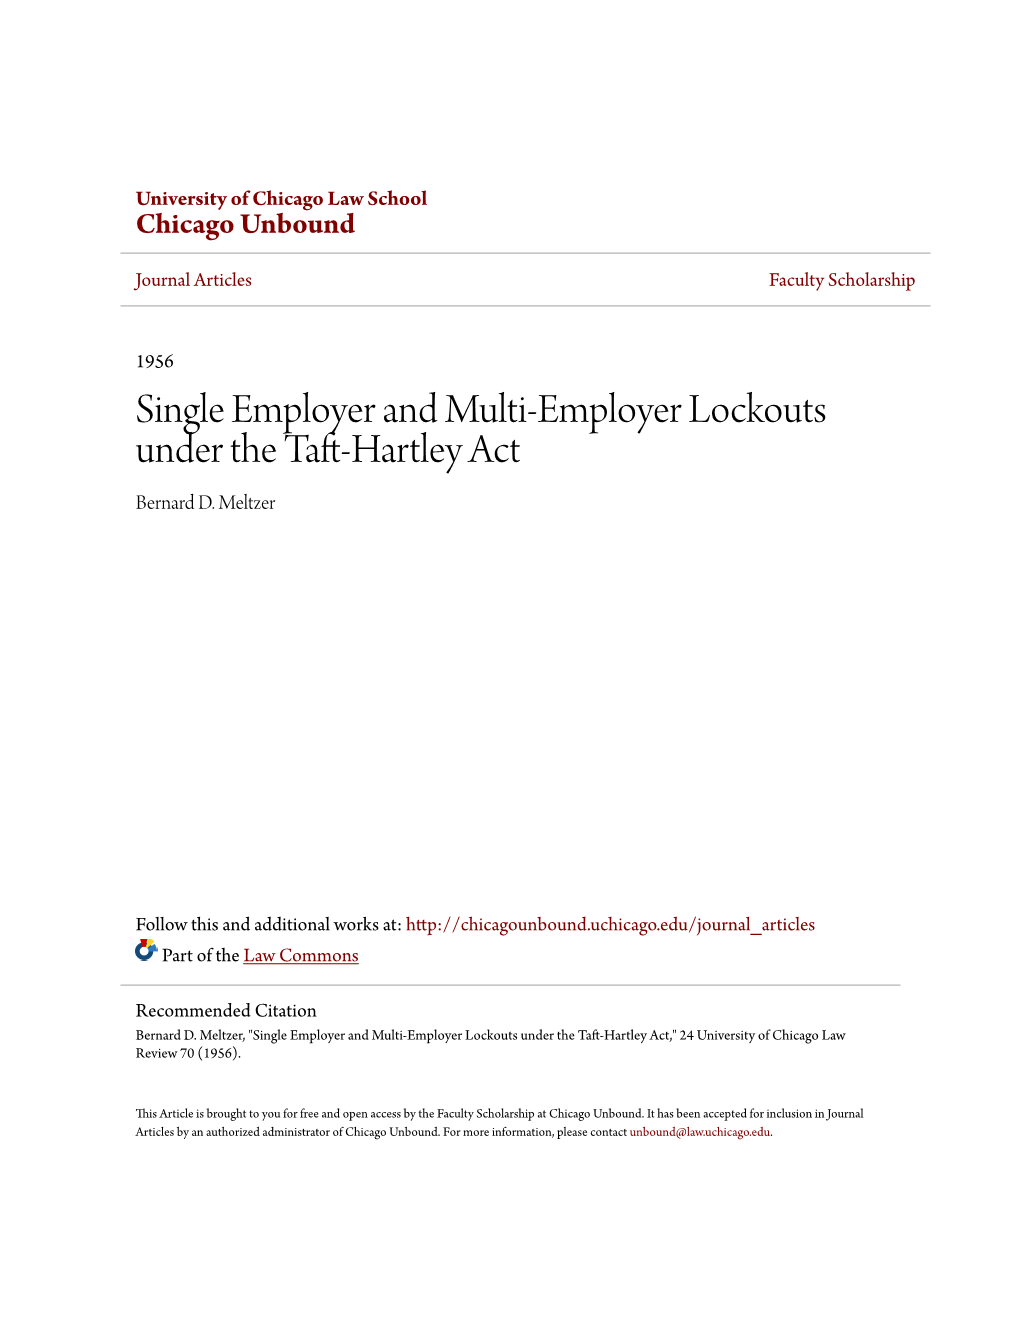 Single Employer and Multi-Employer Lockouts Under the Taft-Hartley Act Bernard D